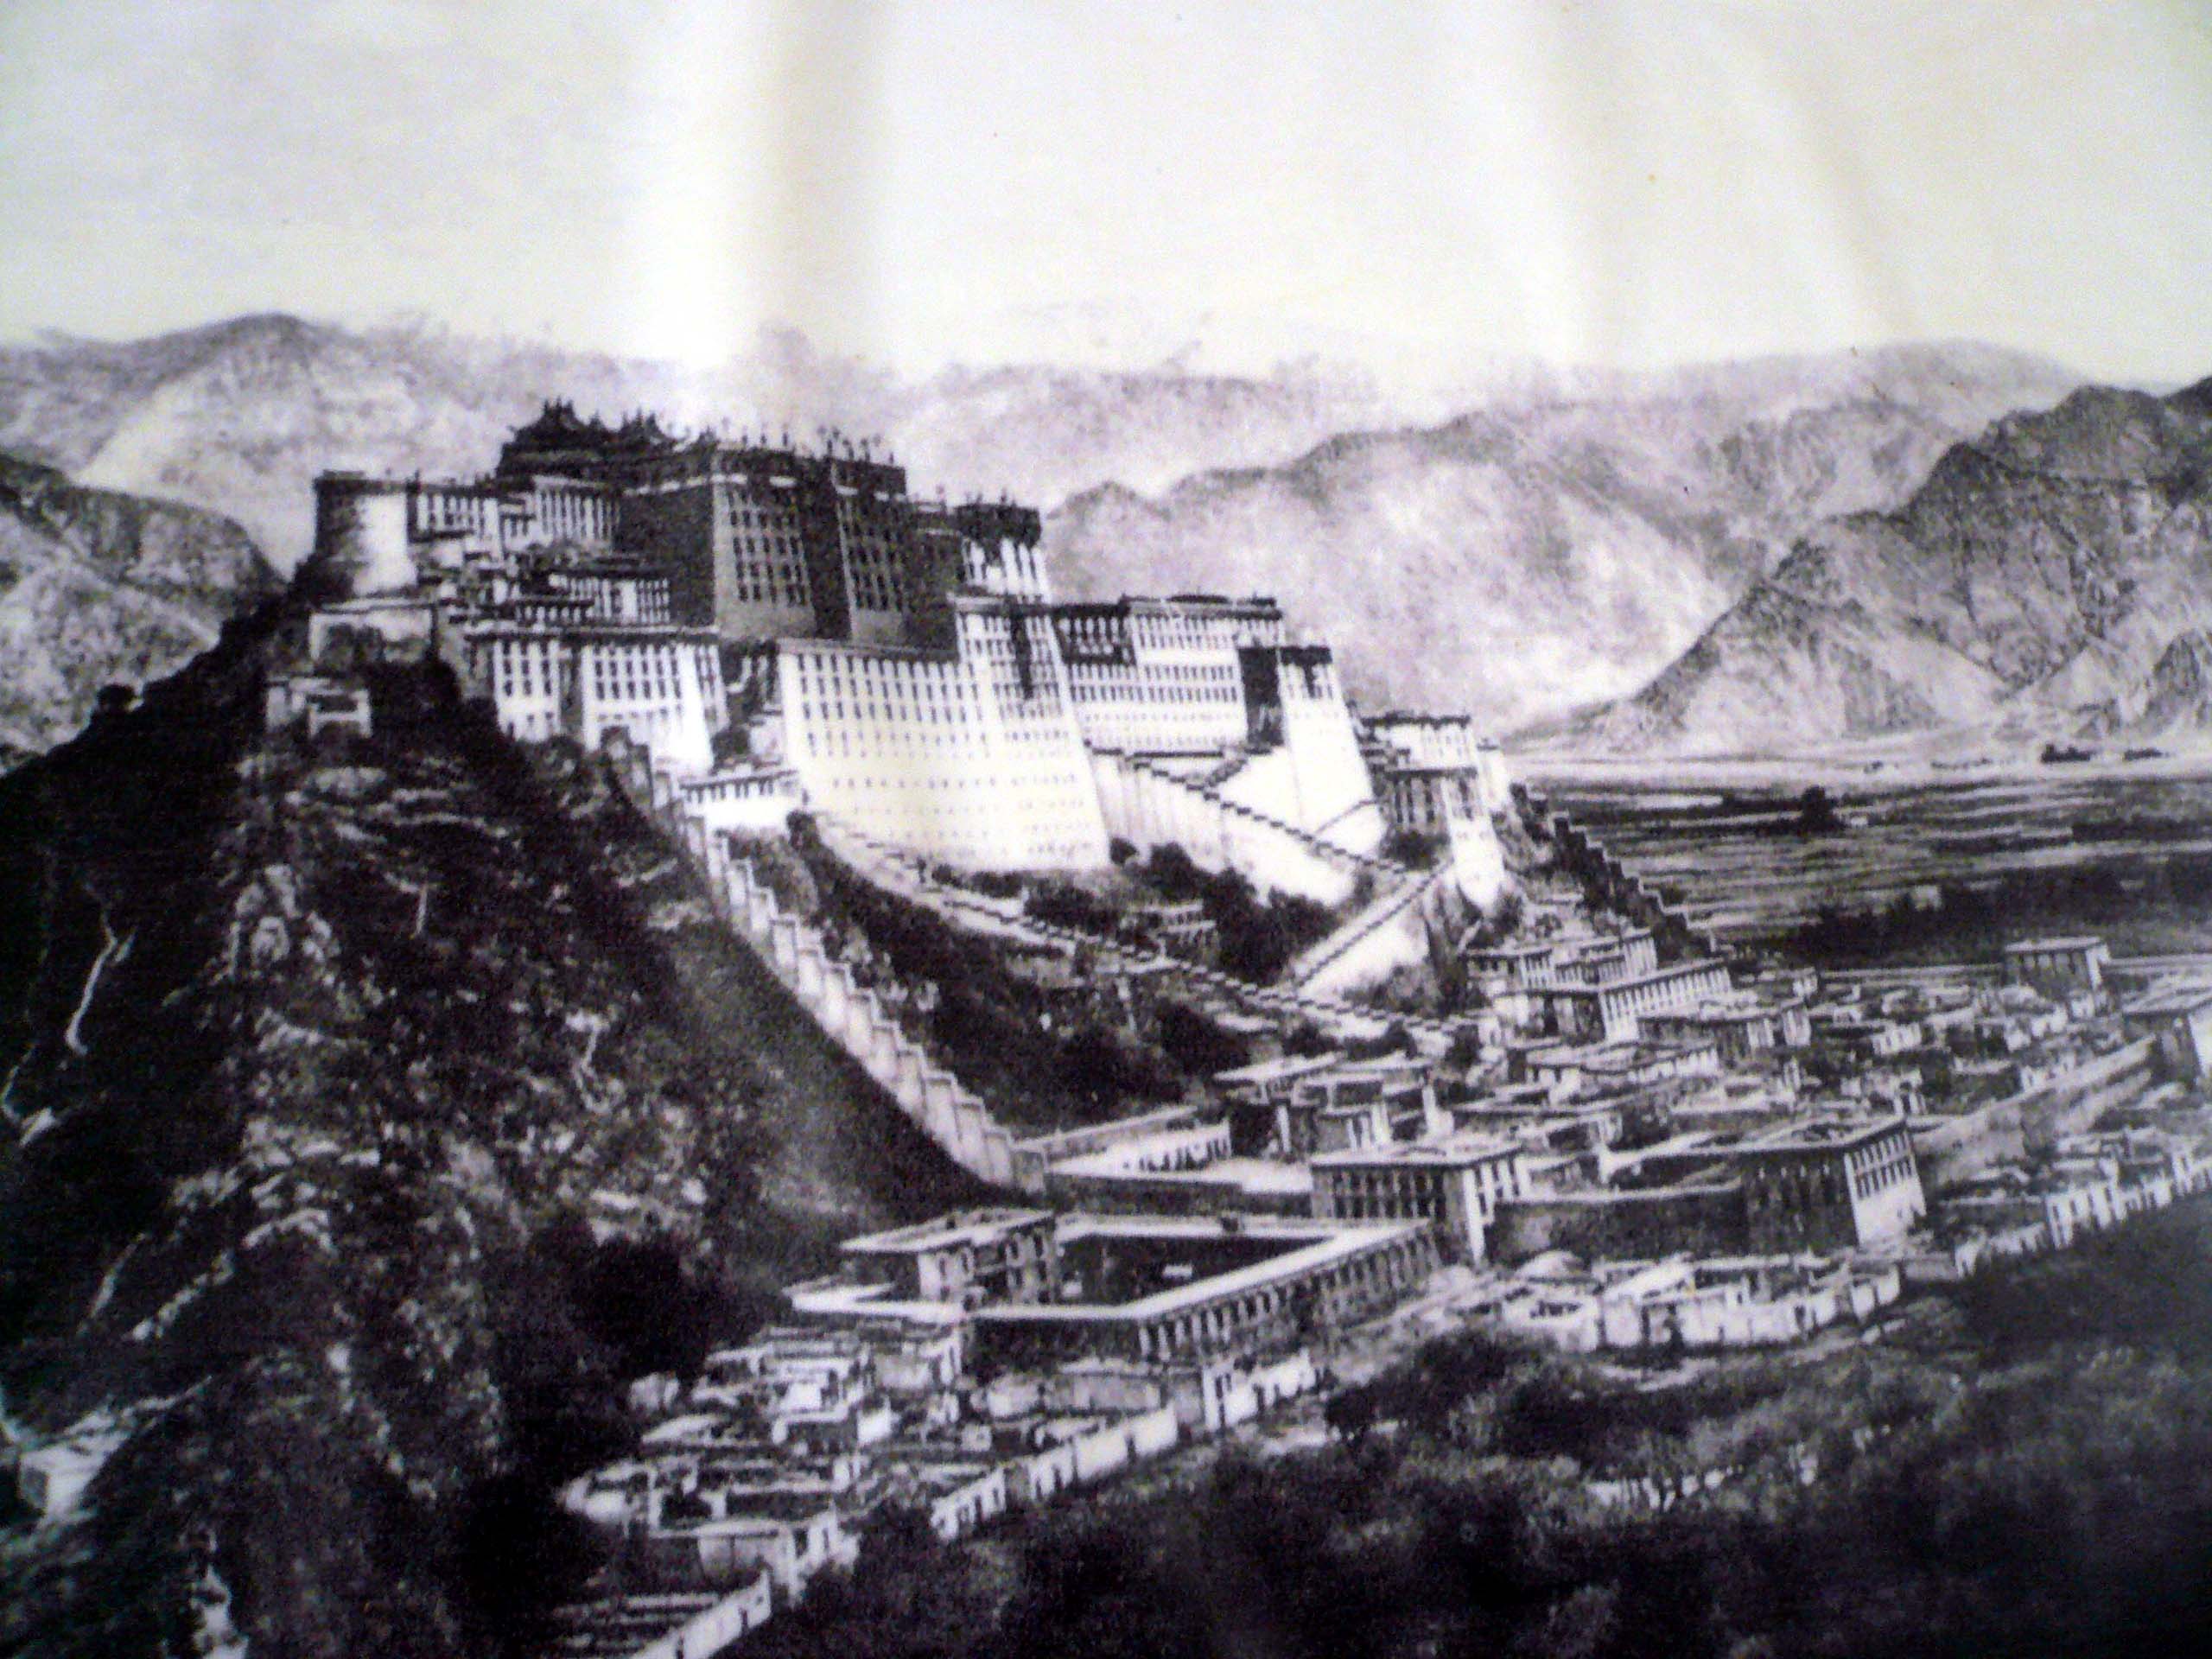 An old photo of how the original Potala Palace and its surrounding. Most of the administrative buildings below have been demolished to create roads and a musical fountain public square